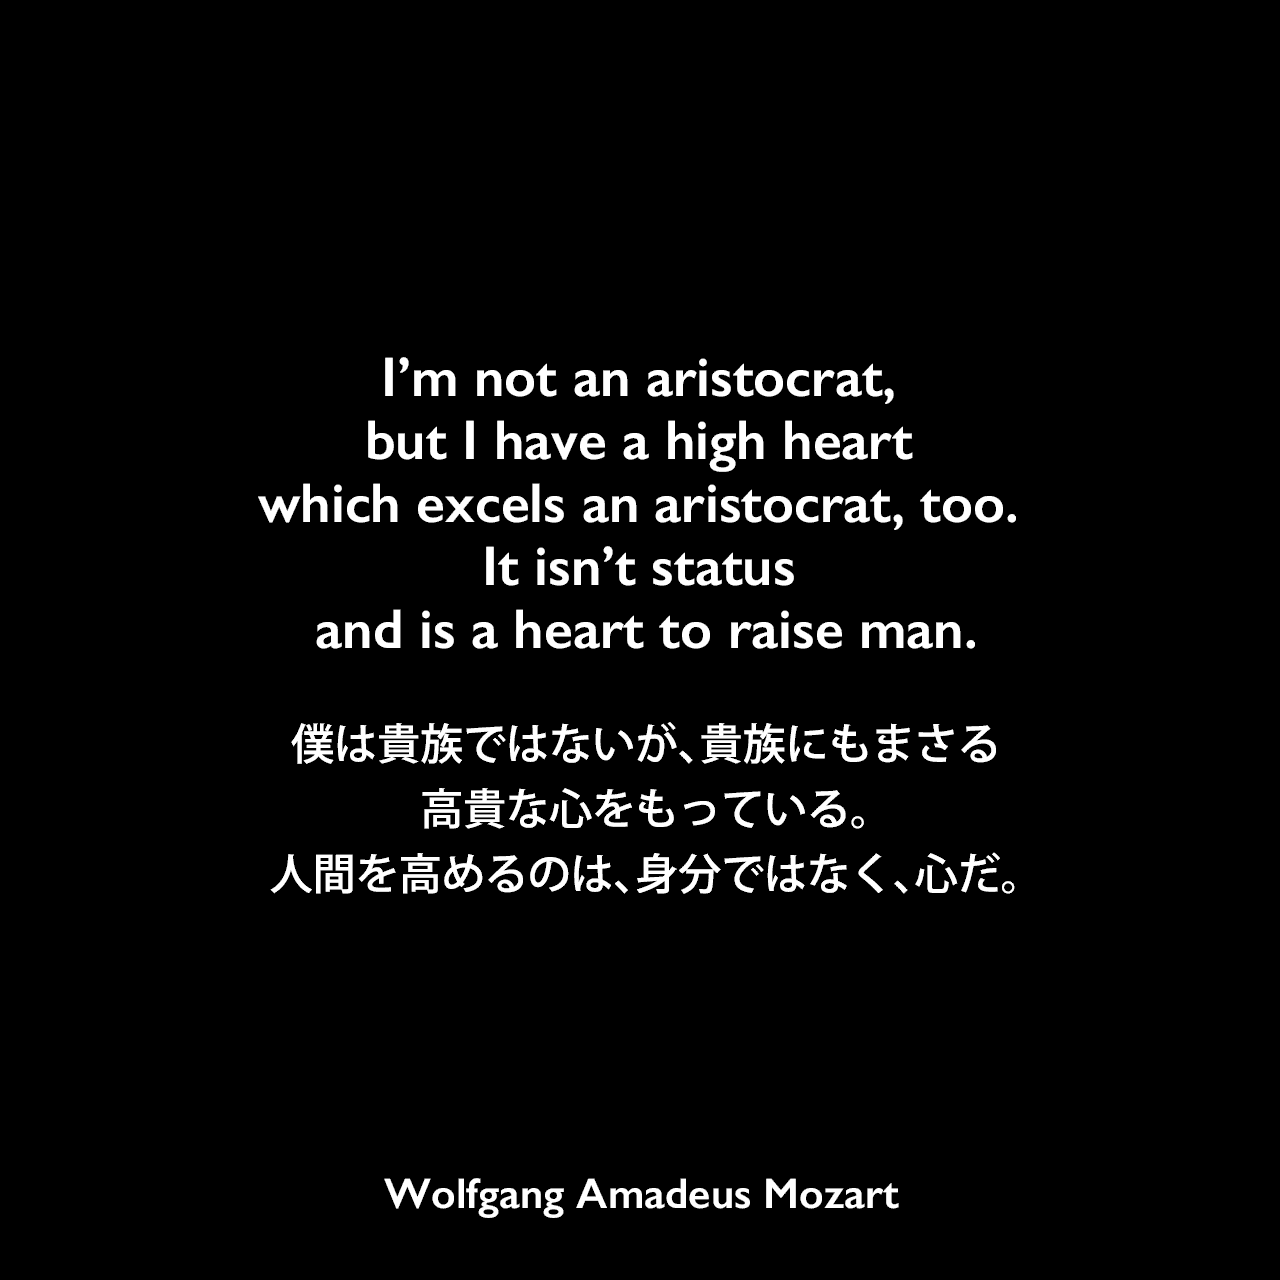 I’m not an aristocrat, but I have a high heart which excels an aristocrat, too. It isn’t status and is a heart to raise man.僕は貴族ではないが、貴族にもまさる高貴な心をもっている。人間を高めるのは、身分ではなく、心だ。Wolfgang Amadeus Mozart